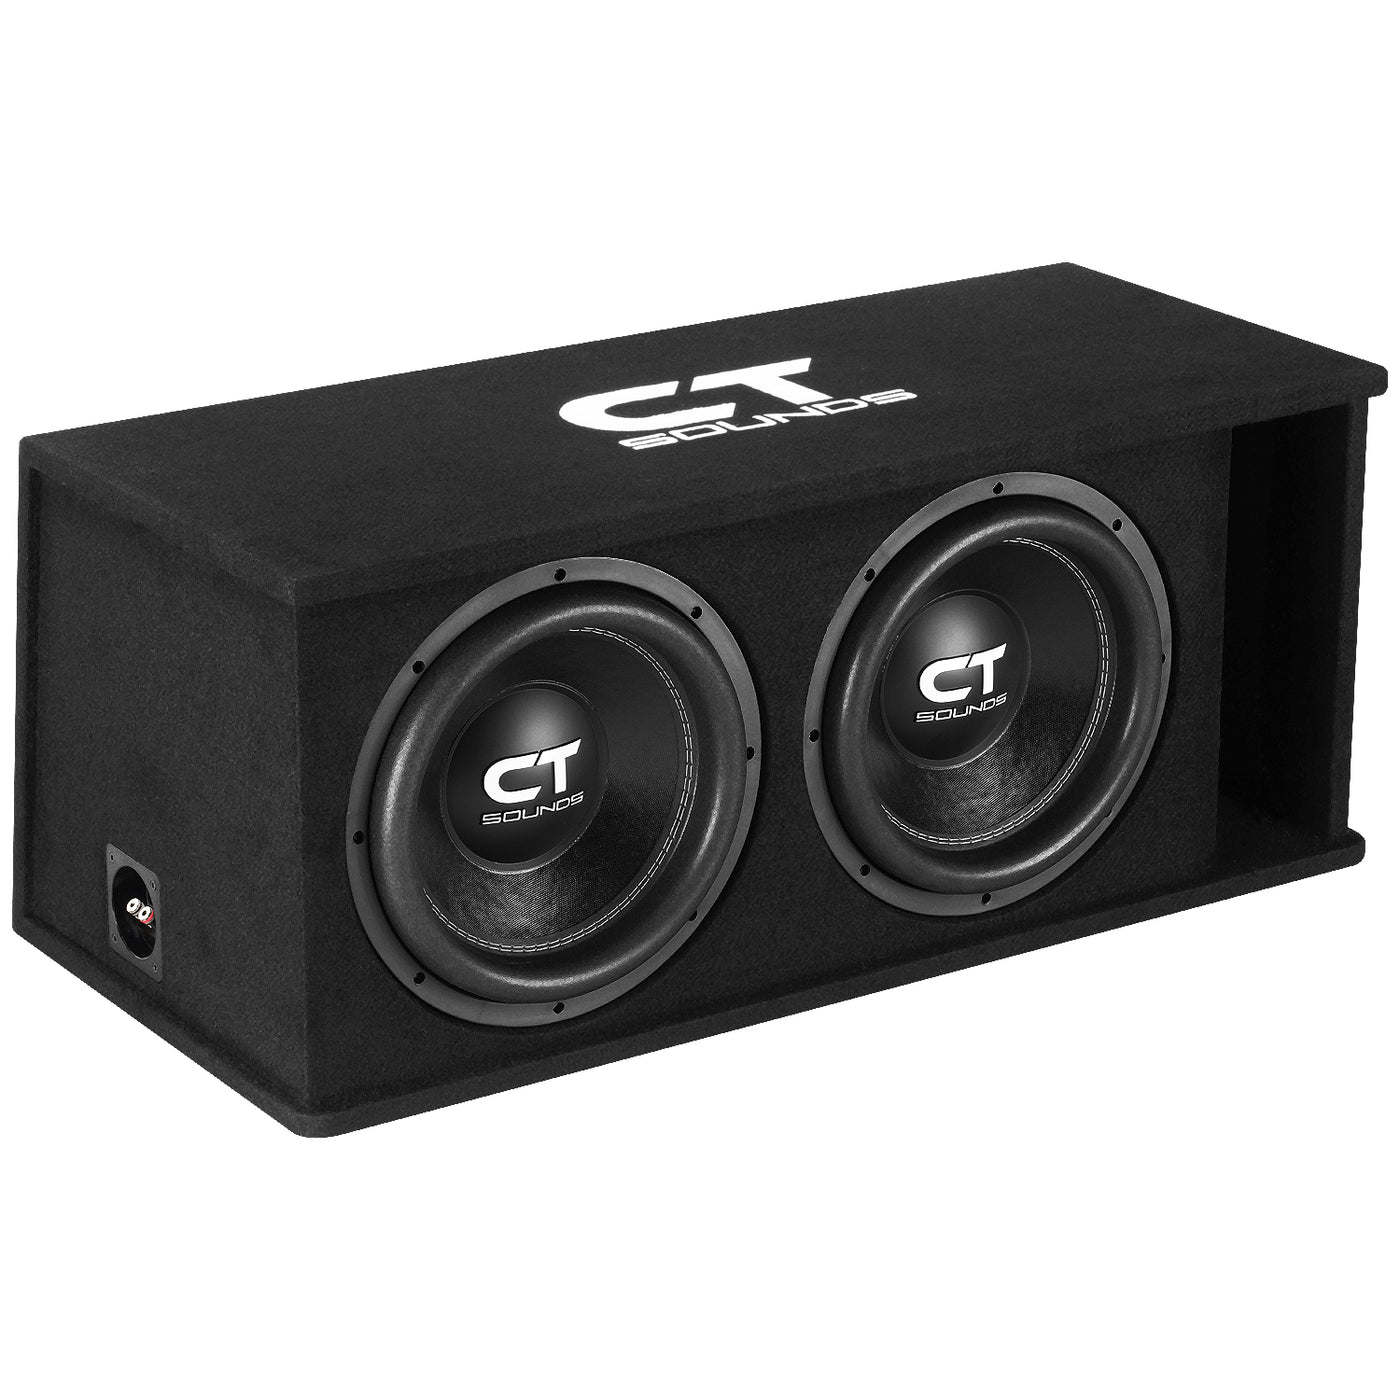 Dual 12” 2600W Complete Bass Package with Loaded Subwoofer Box and Amplifier